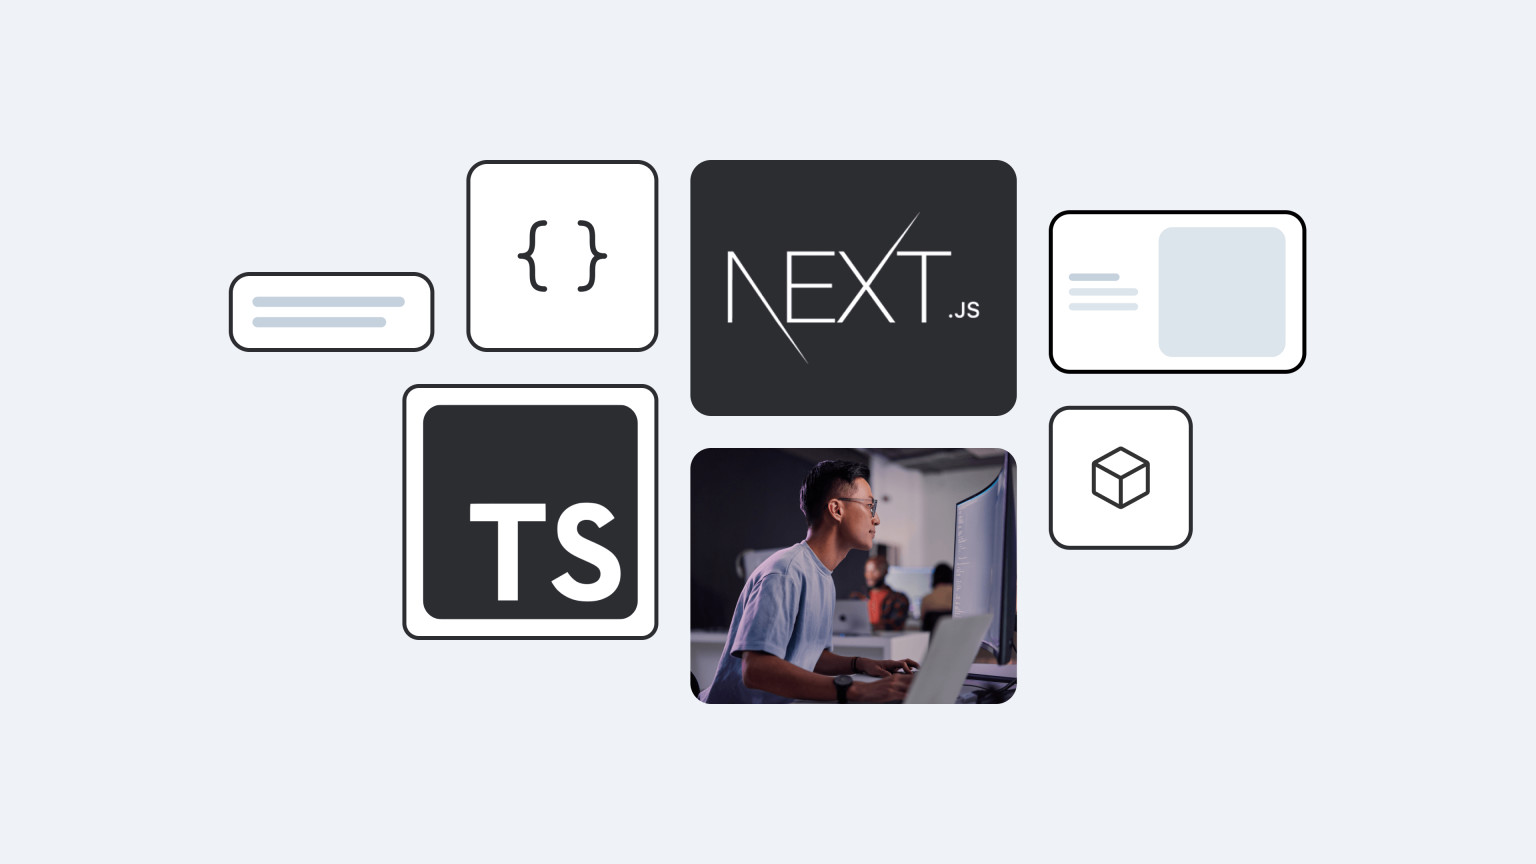 TypeScript makes Next.js development more streamlined, less error prone and more enjoyable. We show how to integrate TypeScript into your Next.js projects.